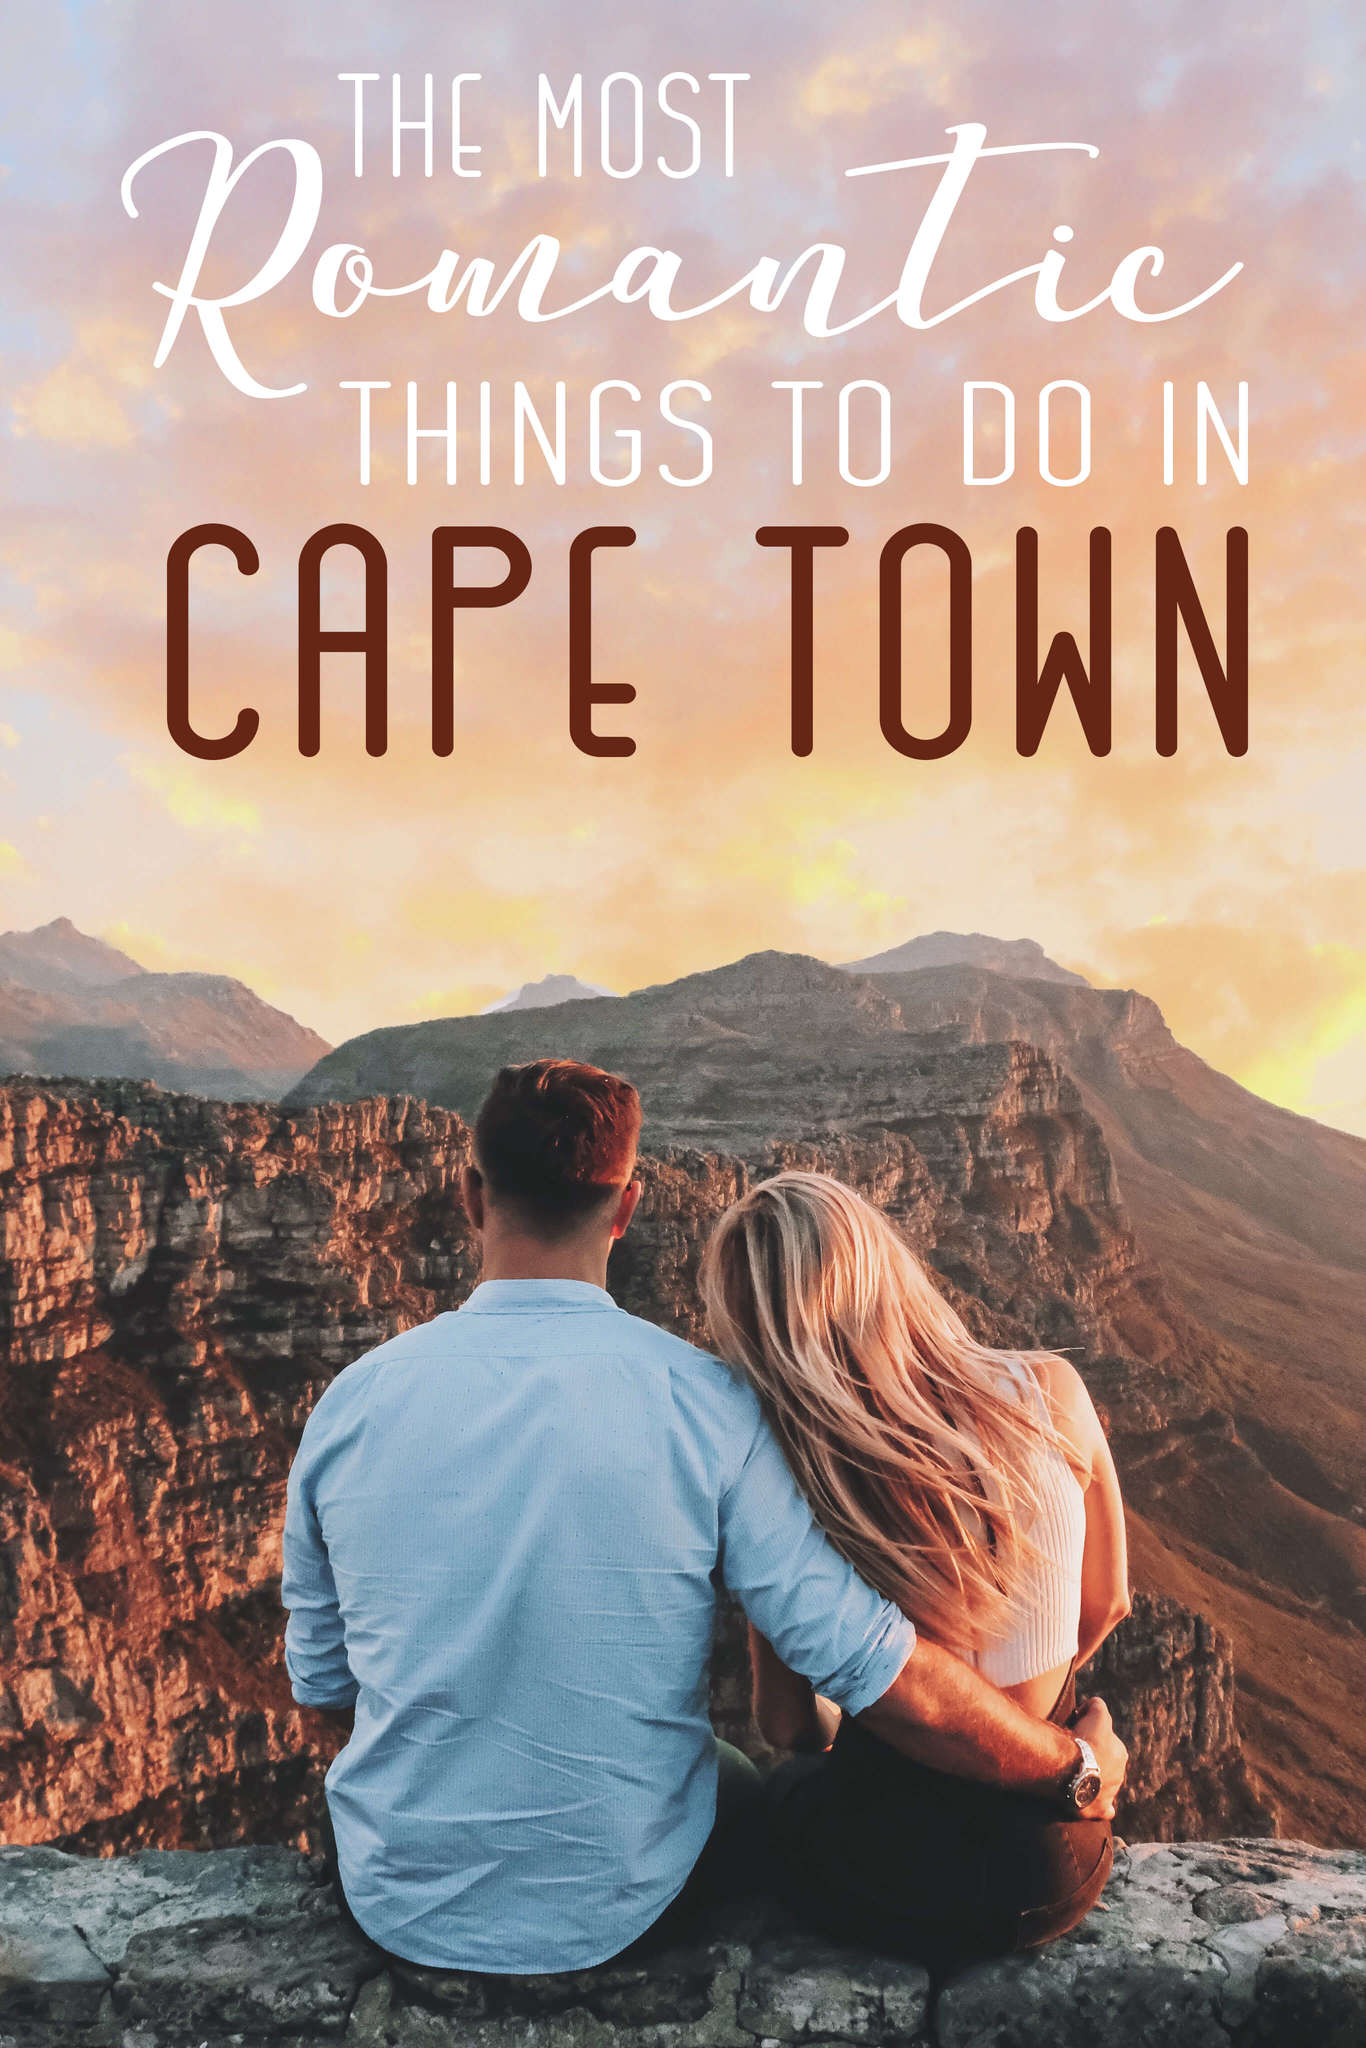 The most Romantic Things to do in Cape Town